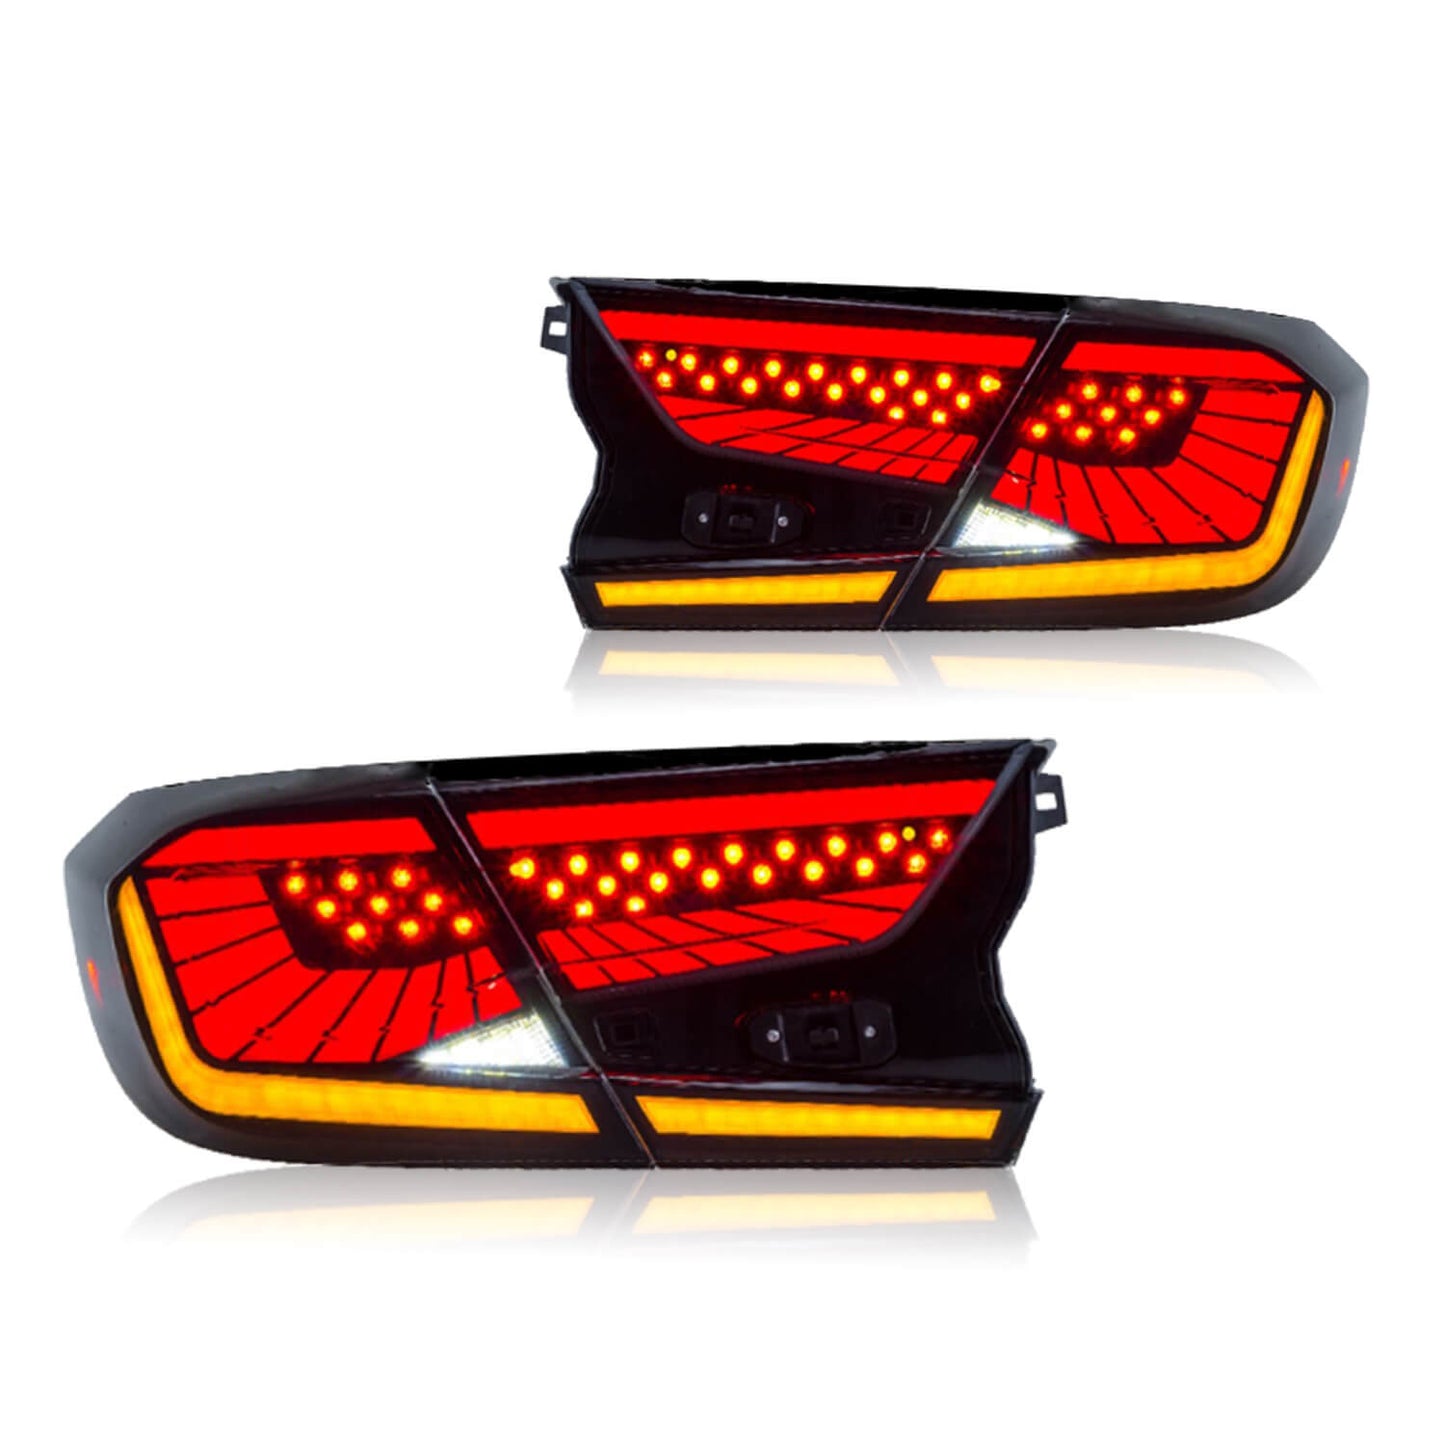 HCMOTION Taillights For Honda Accord 2018-2022